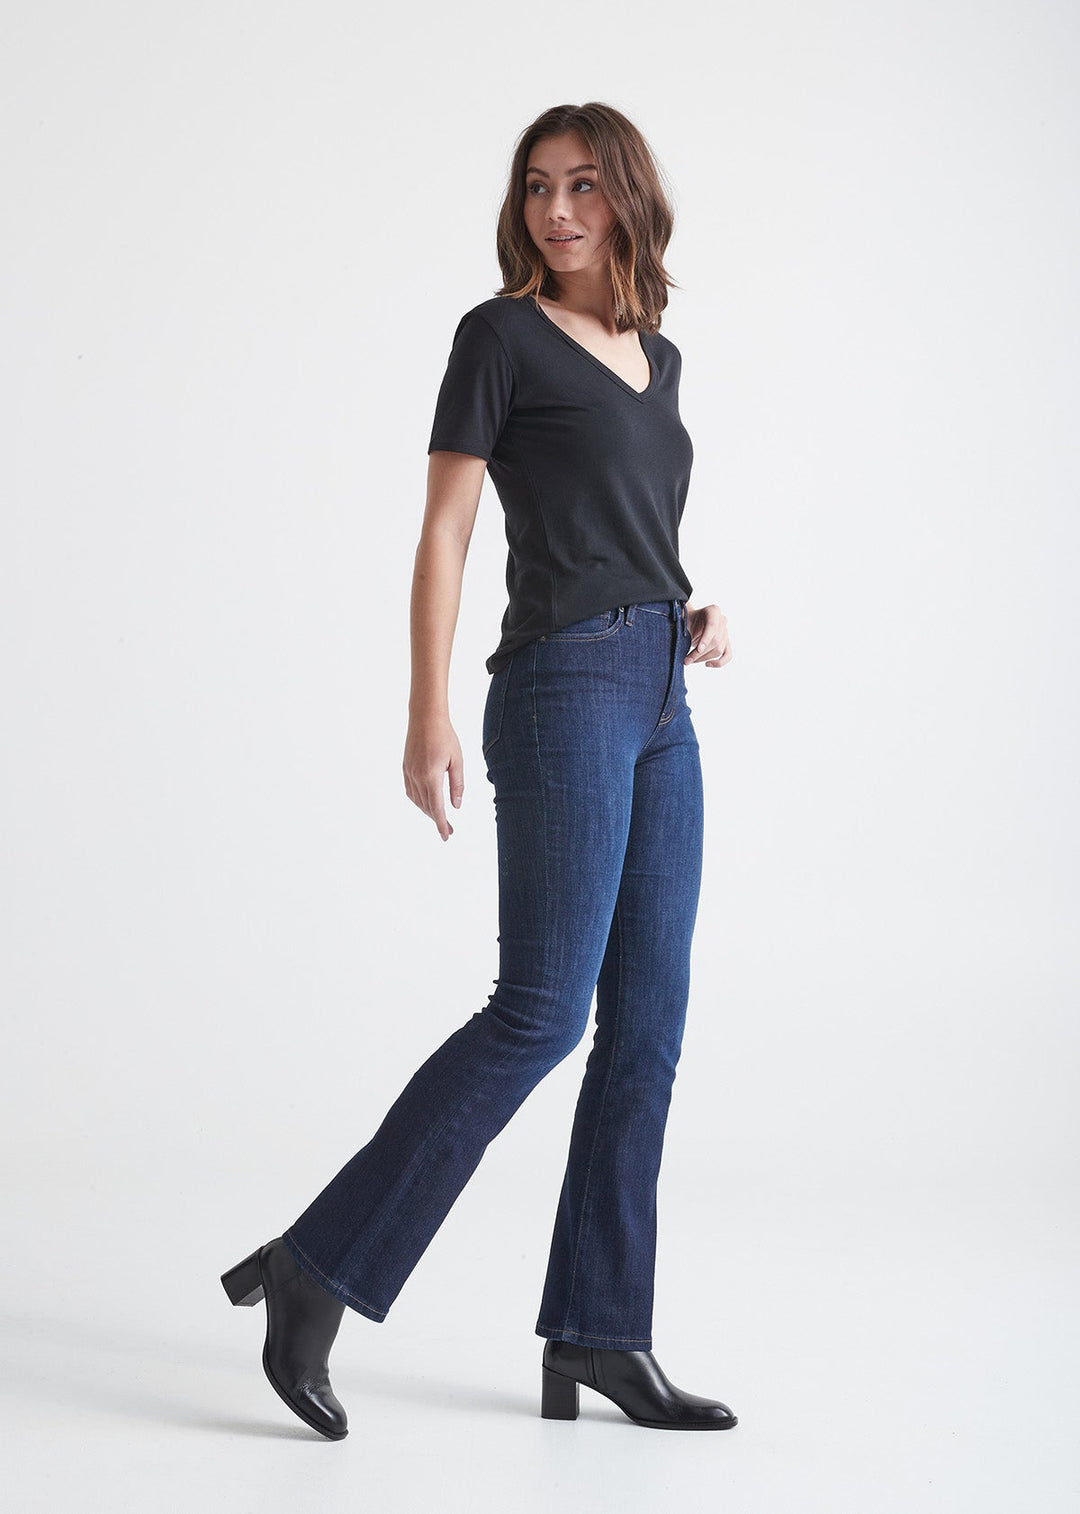 DU/ER - Performance Denim High Rise Bootcut - all thing being eco chilliwack - women's clothing store